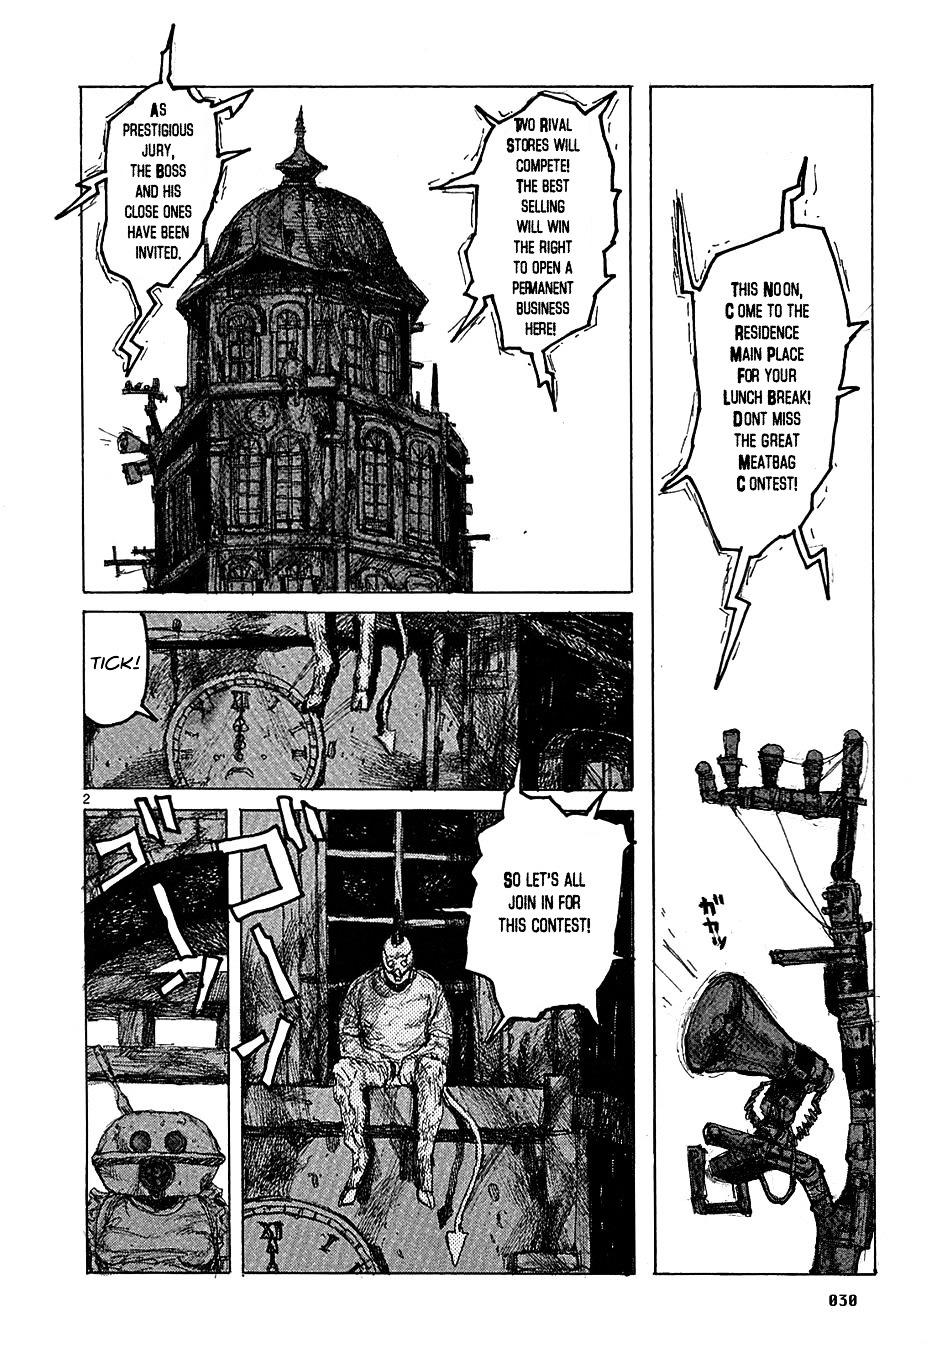 Dorohedoro Chapter 38 : Meatbags Free For All page 2 - Mangakakalot